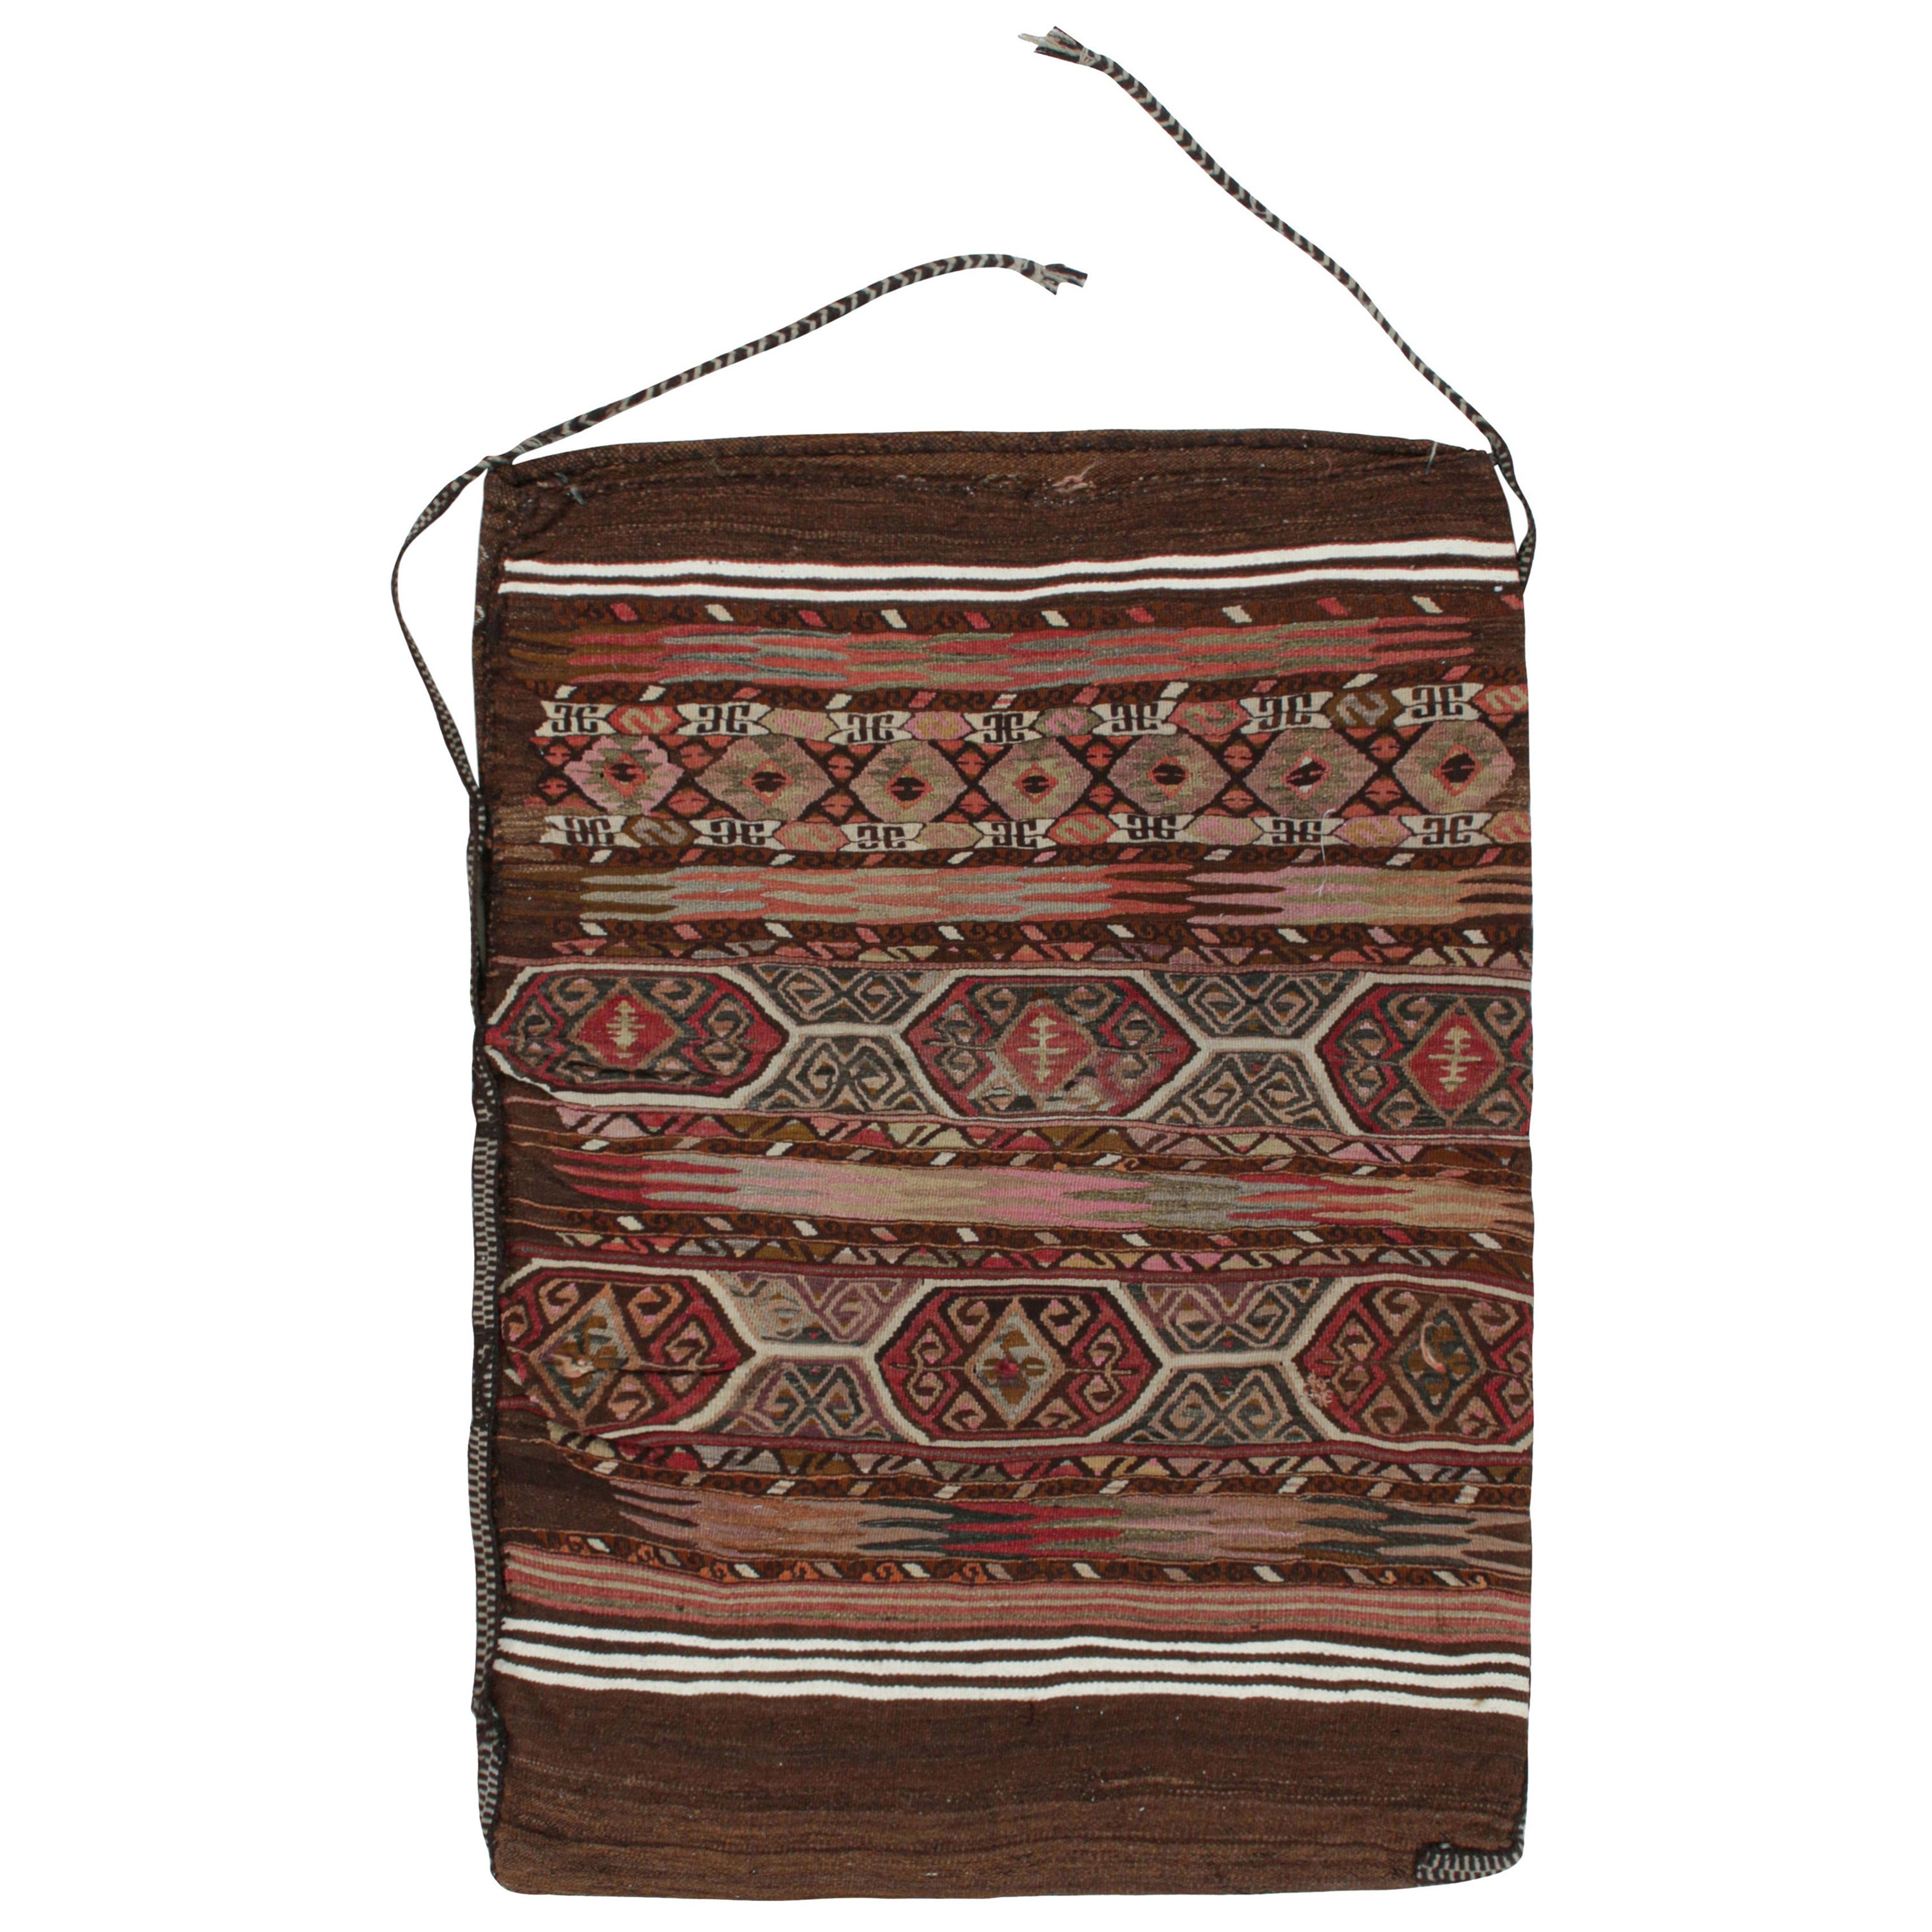 Antique Persian Tribal bag and Textile with Geometric Patterns, from Rug & Kilim